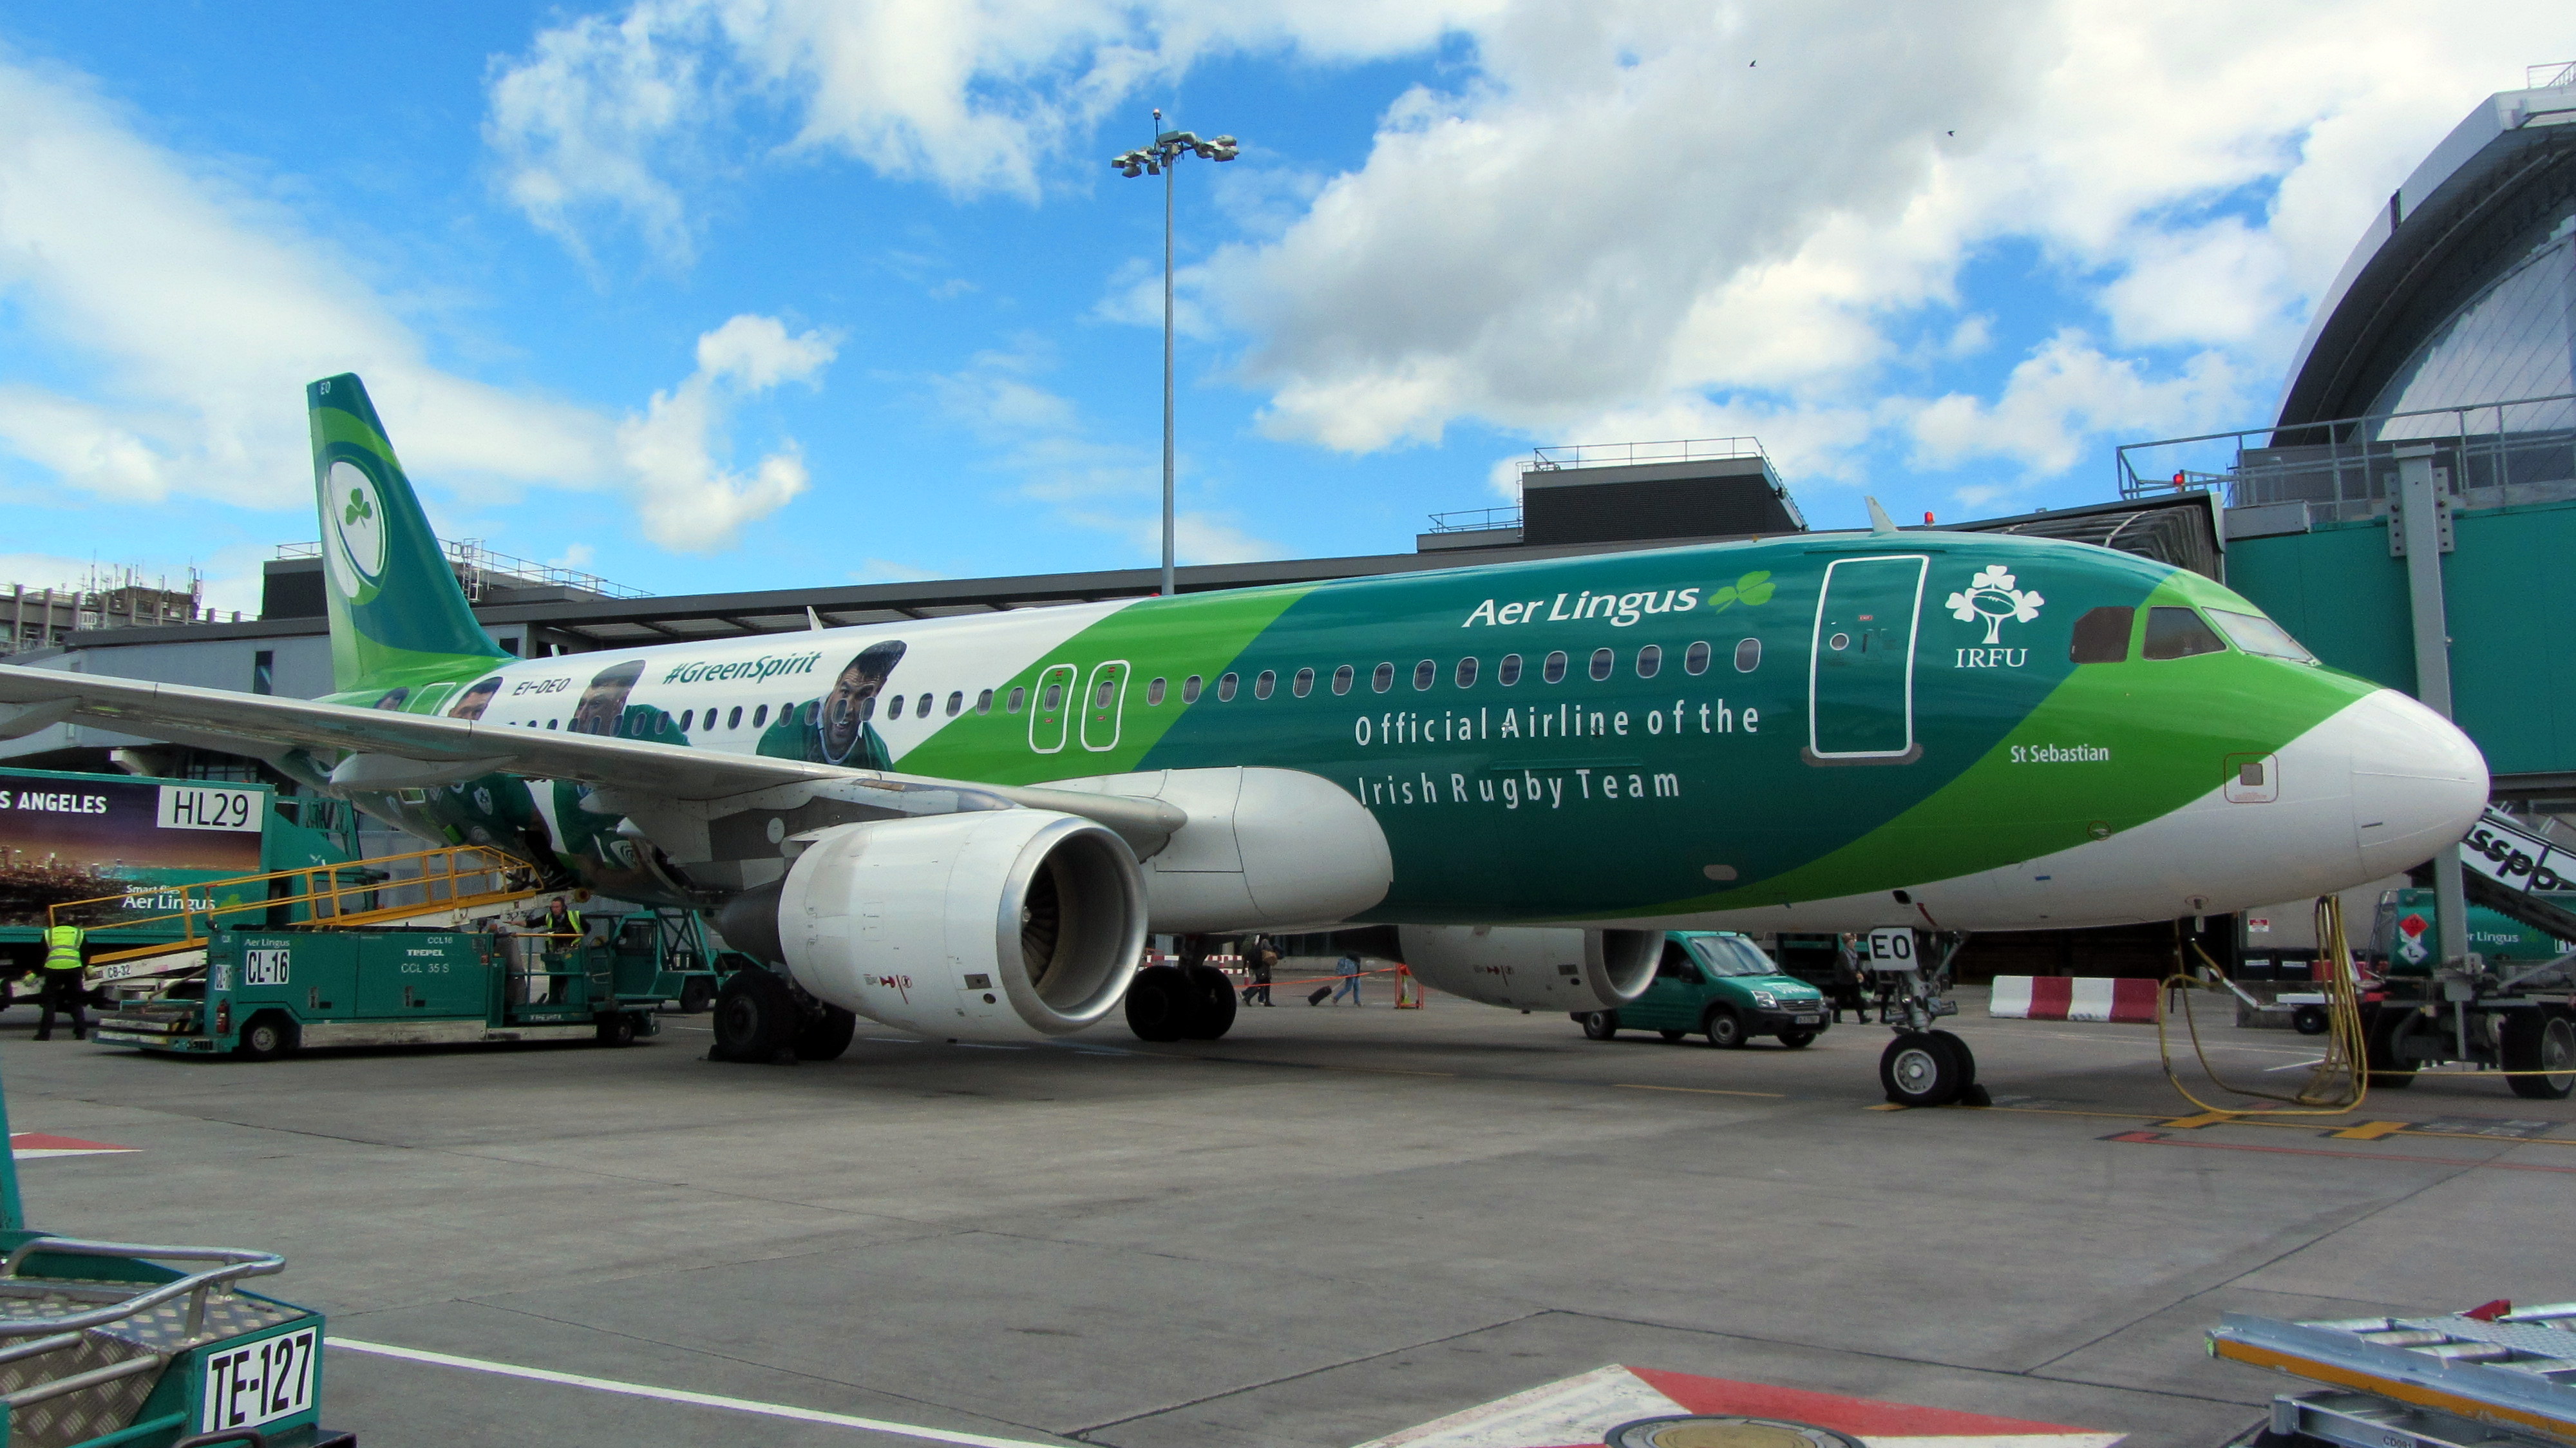 Arriving at gate together with sister aircraft Green Spirit promoting the Irish Rugby Team